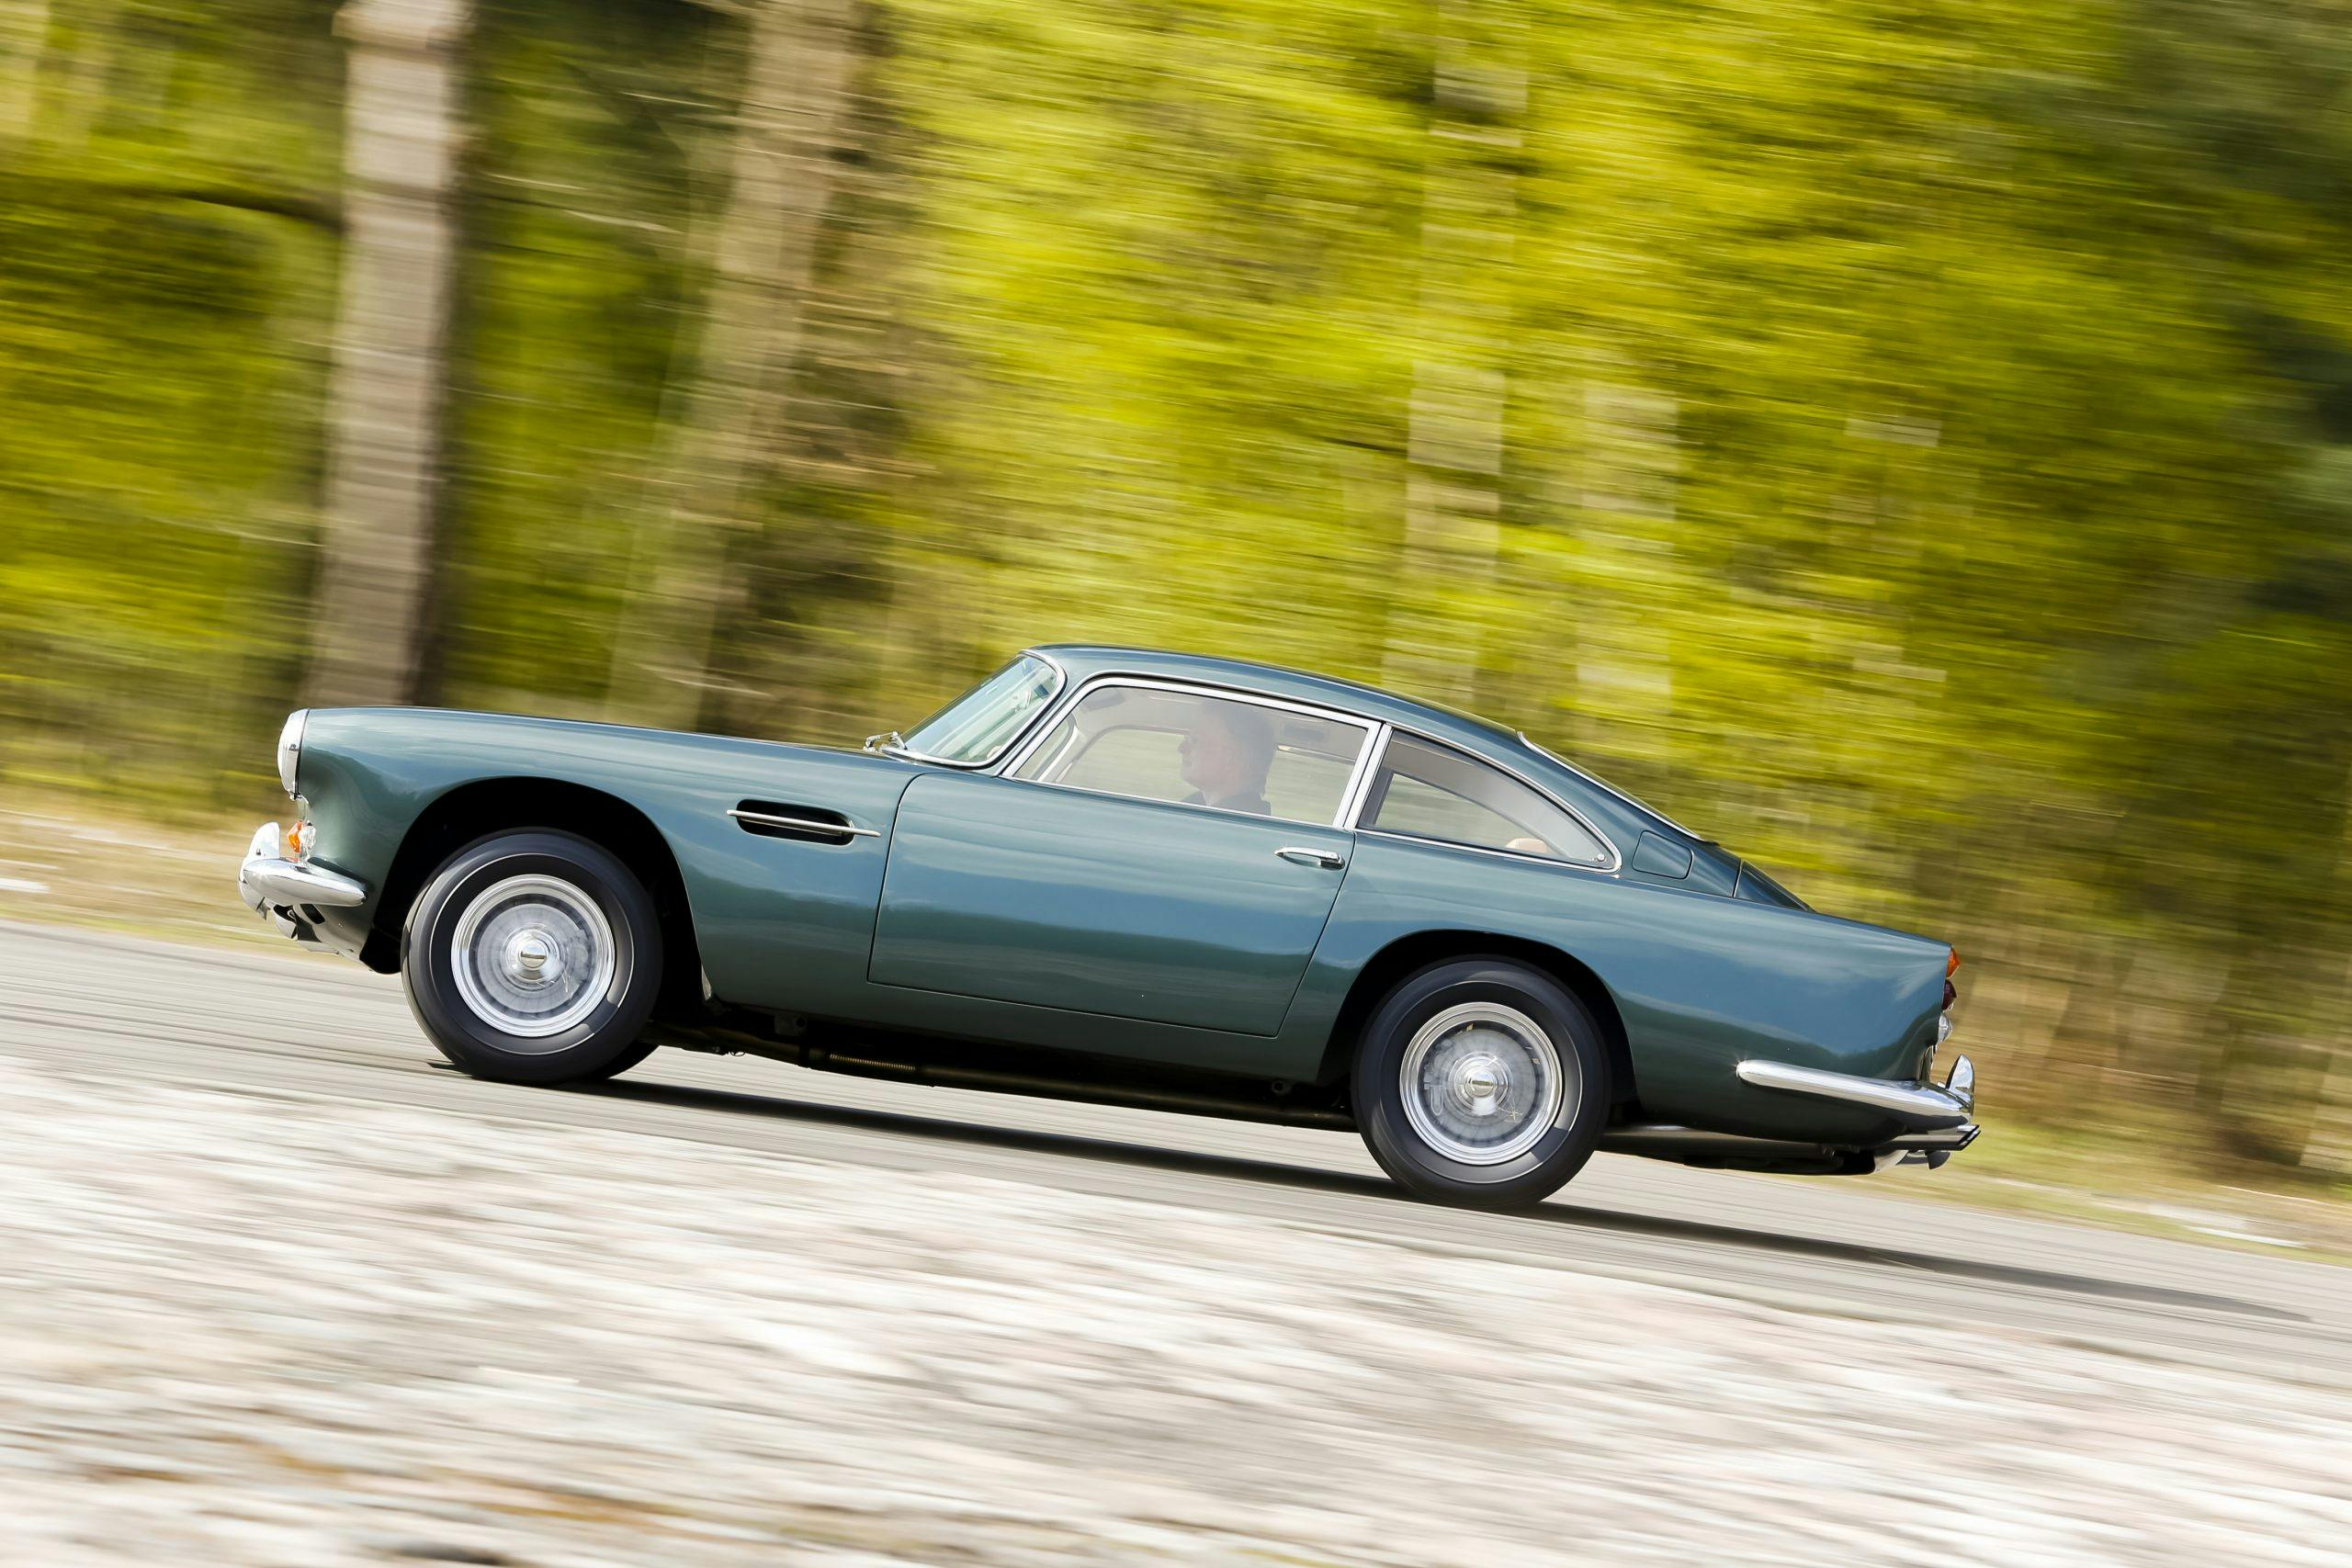 Aston Martin DB4 side view driving action